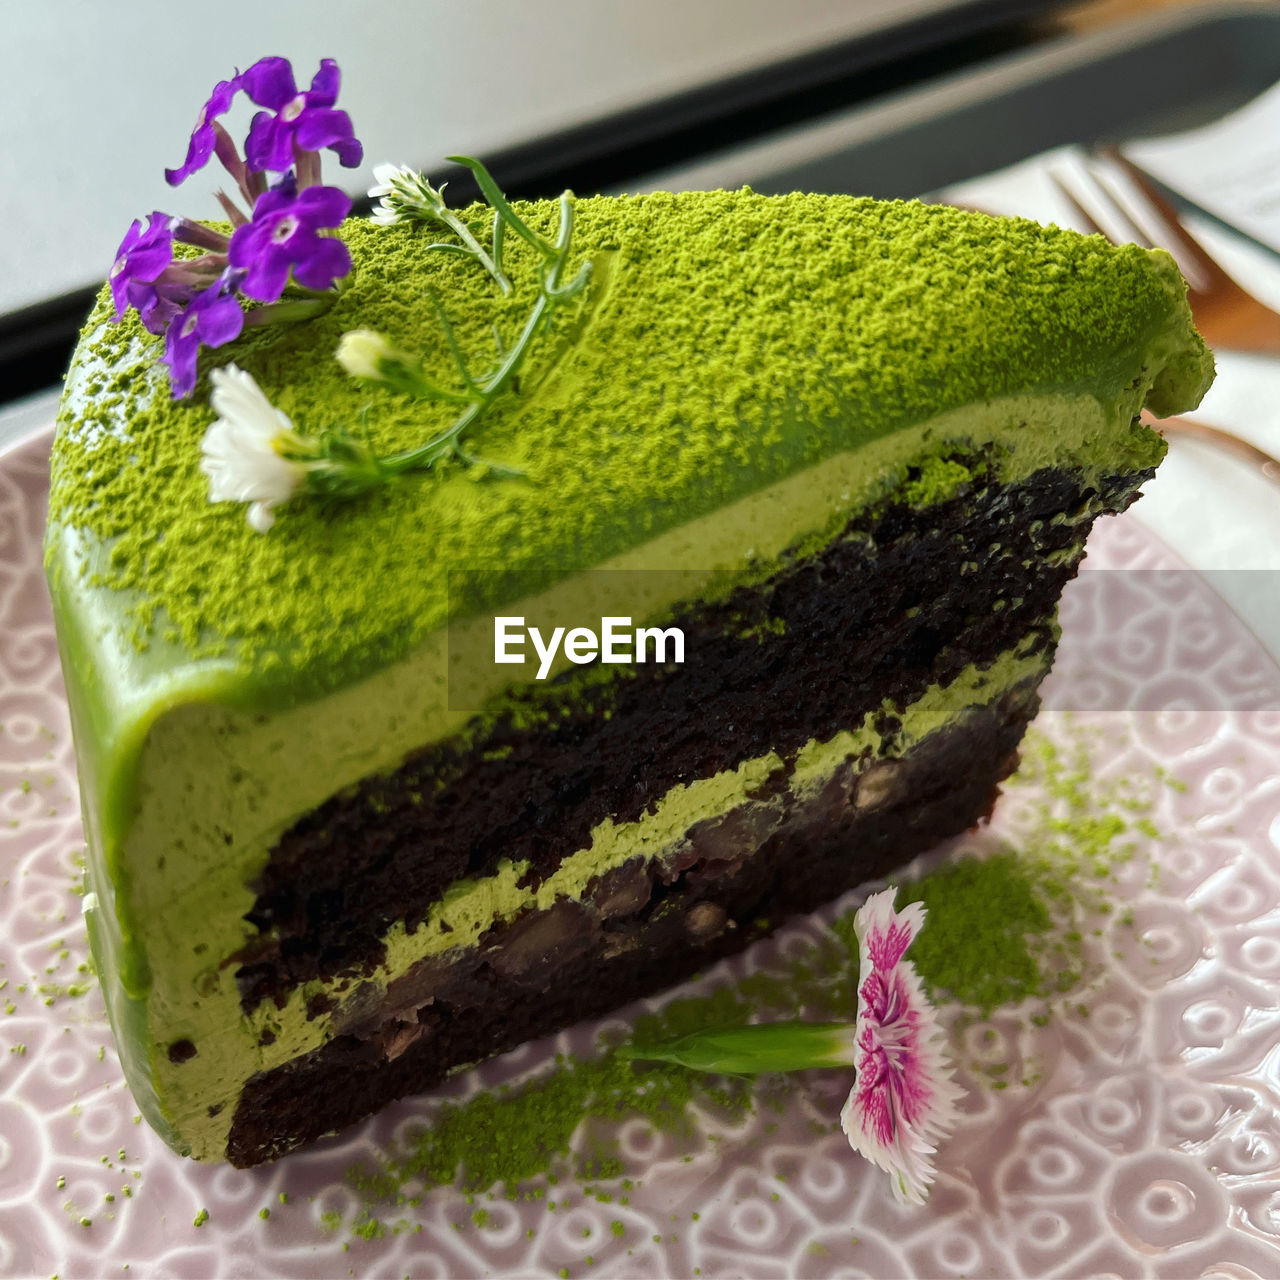 birthday cake, food, food and drink, dessert, sweet food, sweet, freshness, cake, green, baked, icing, flower, indoors, chocolate cake, no people, flowering plant, close-up, plant, temptation, produce, plate, healthy eating, chocolate, still life, fruit, slice